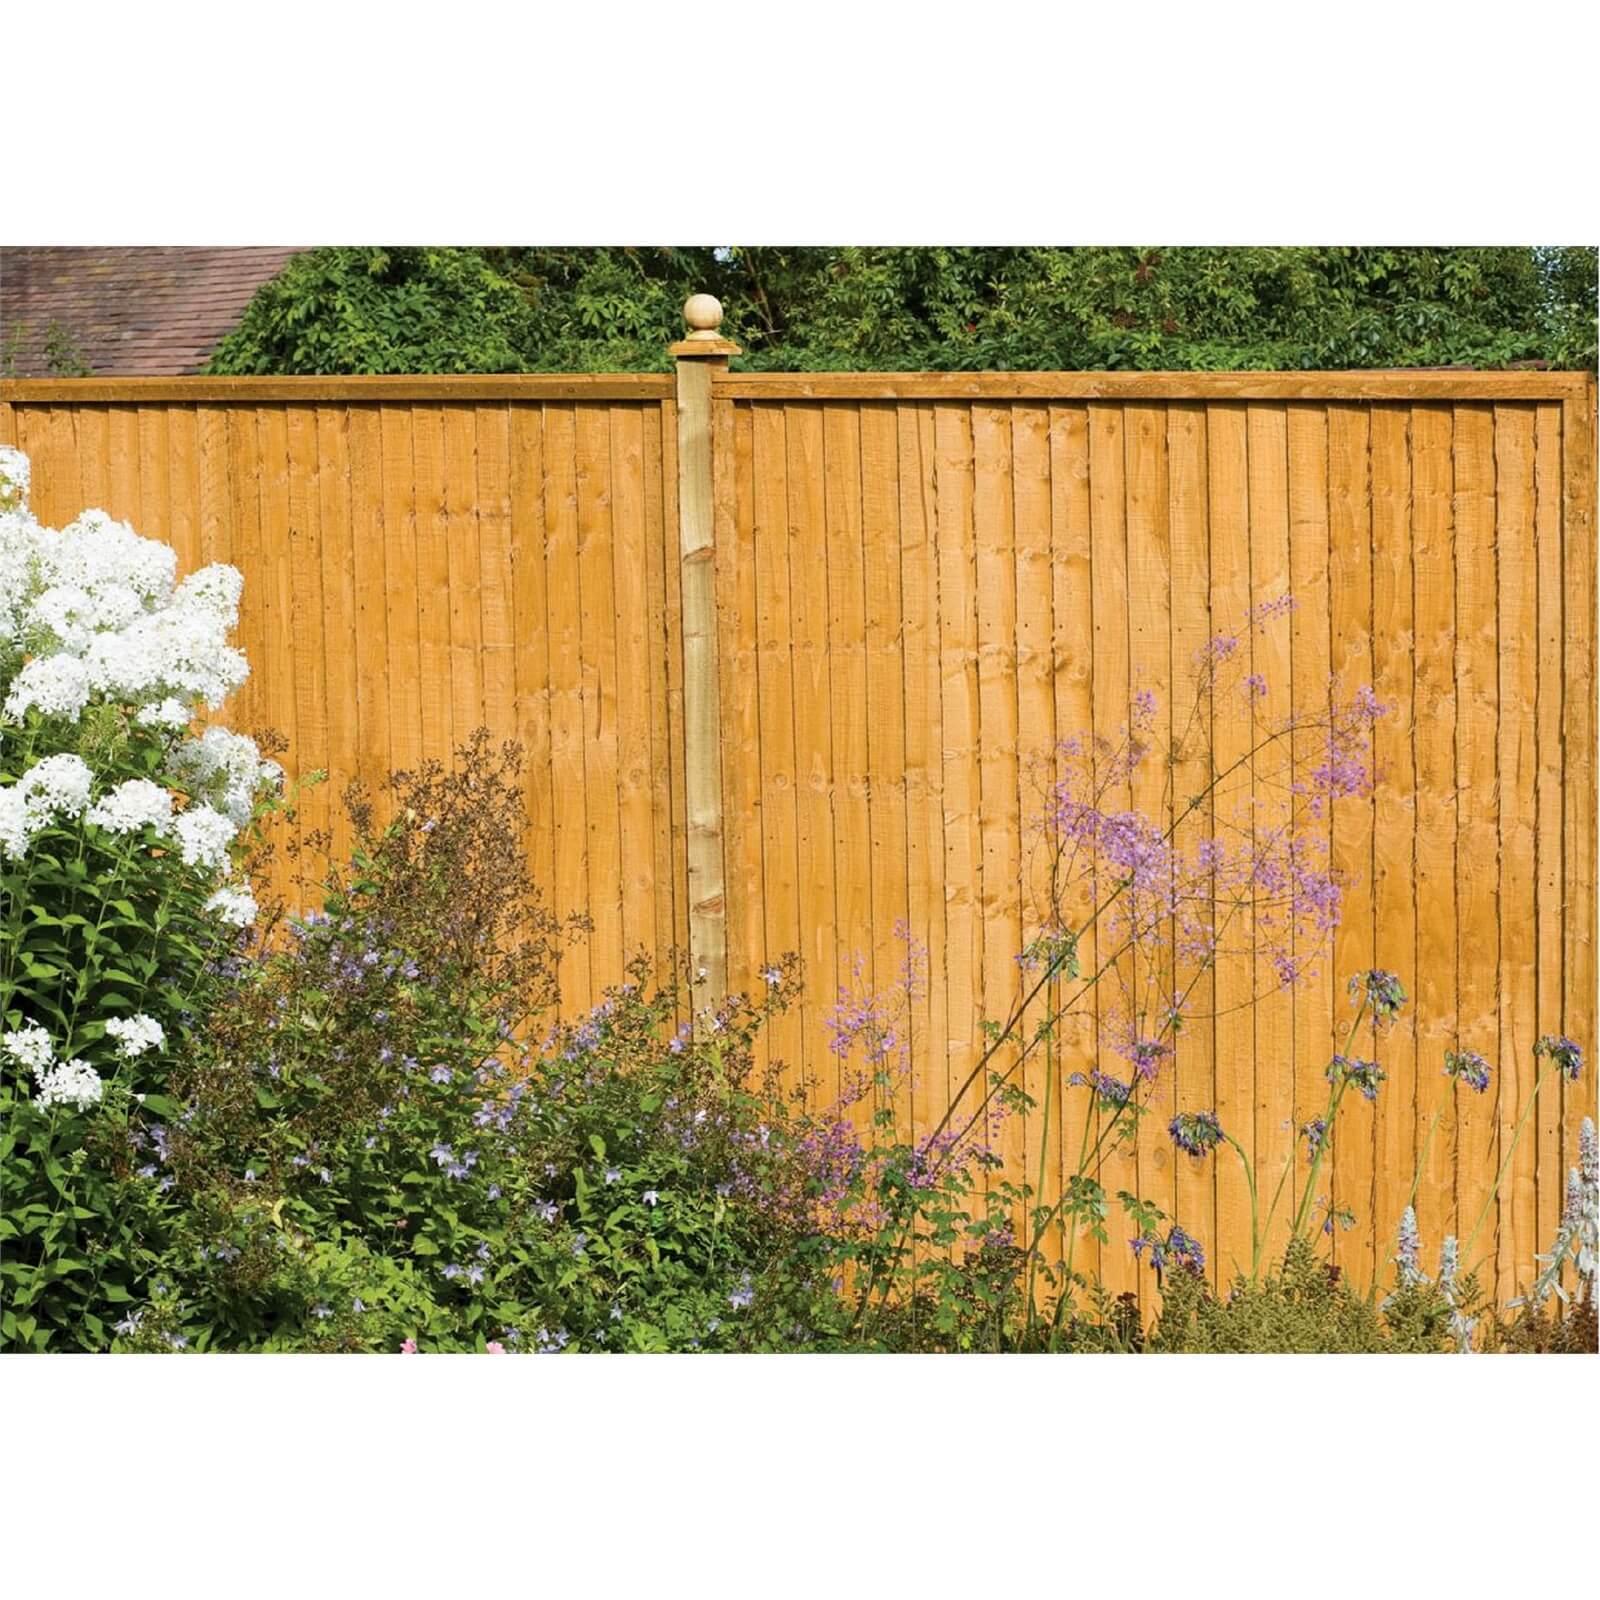 Forest Larchlap Closeboard 0.9m Fence Panel - Pack of 4